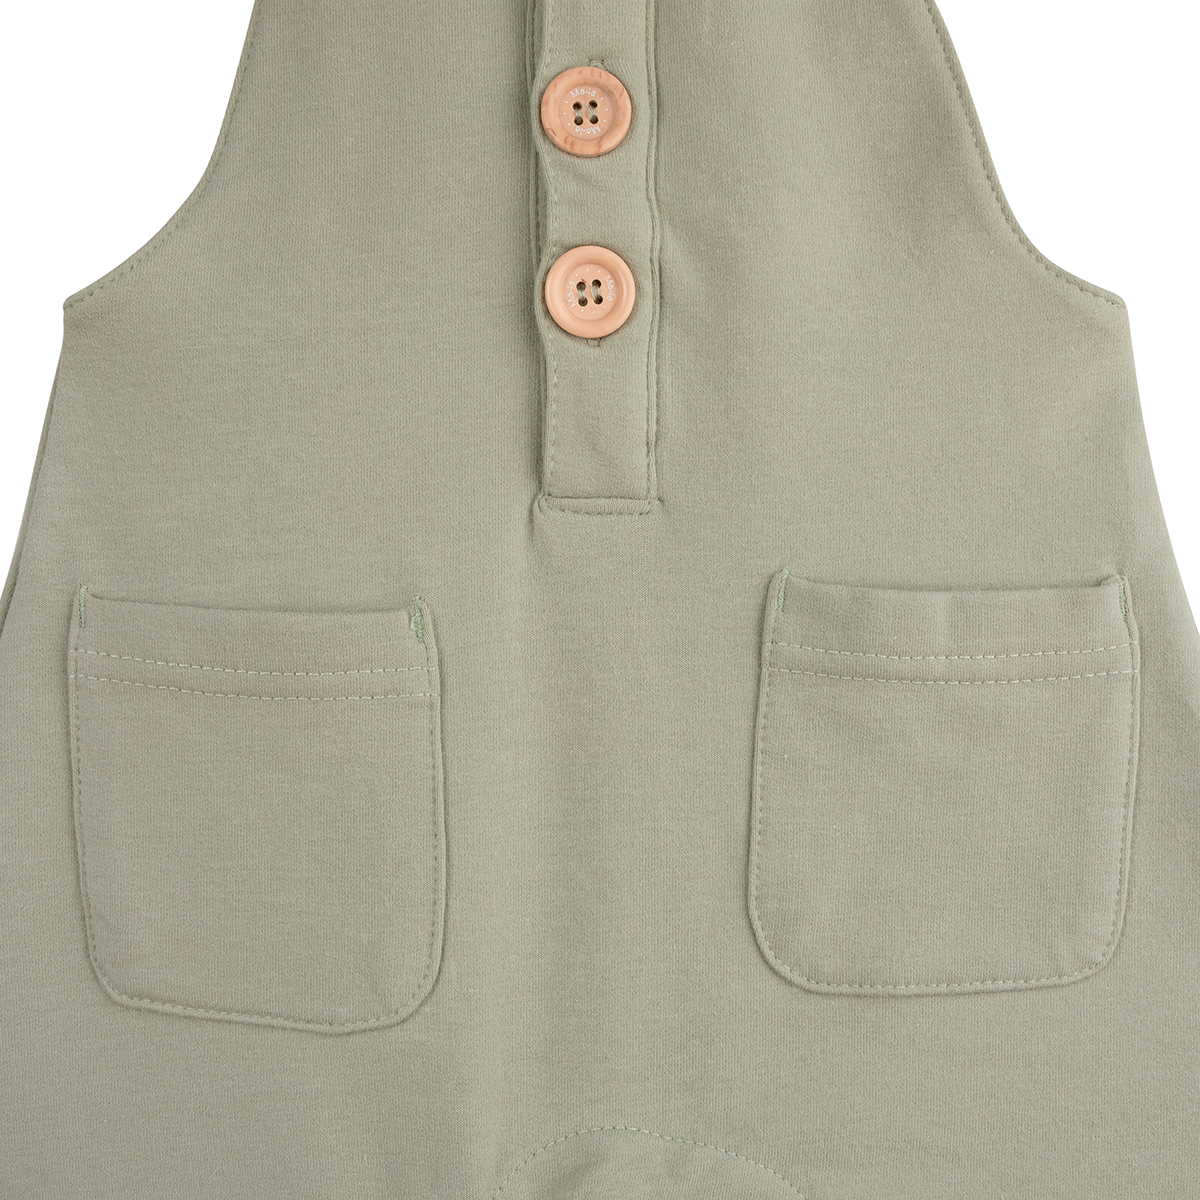 Aapo overalls, green